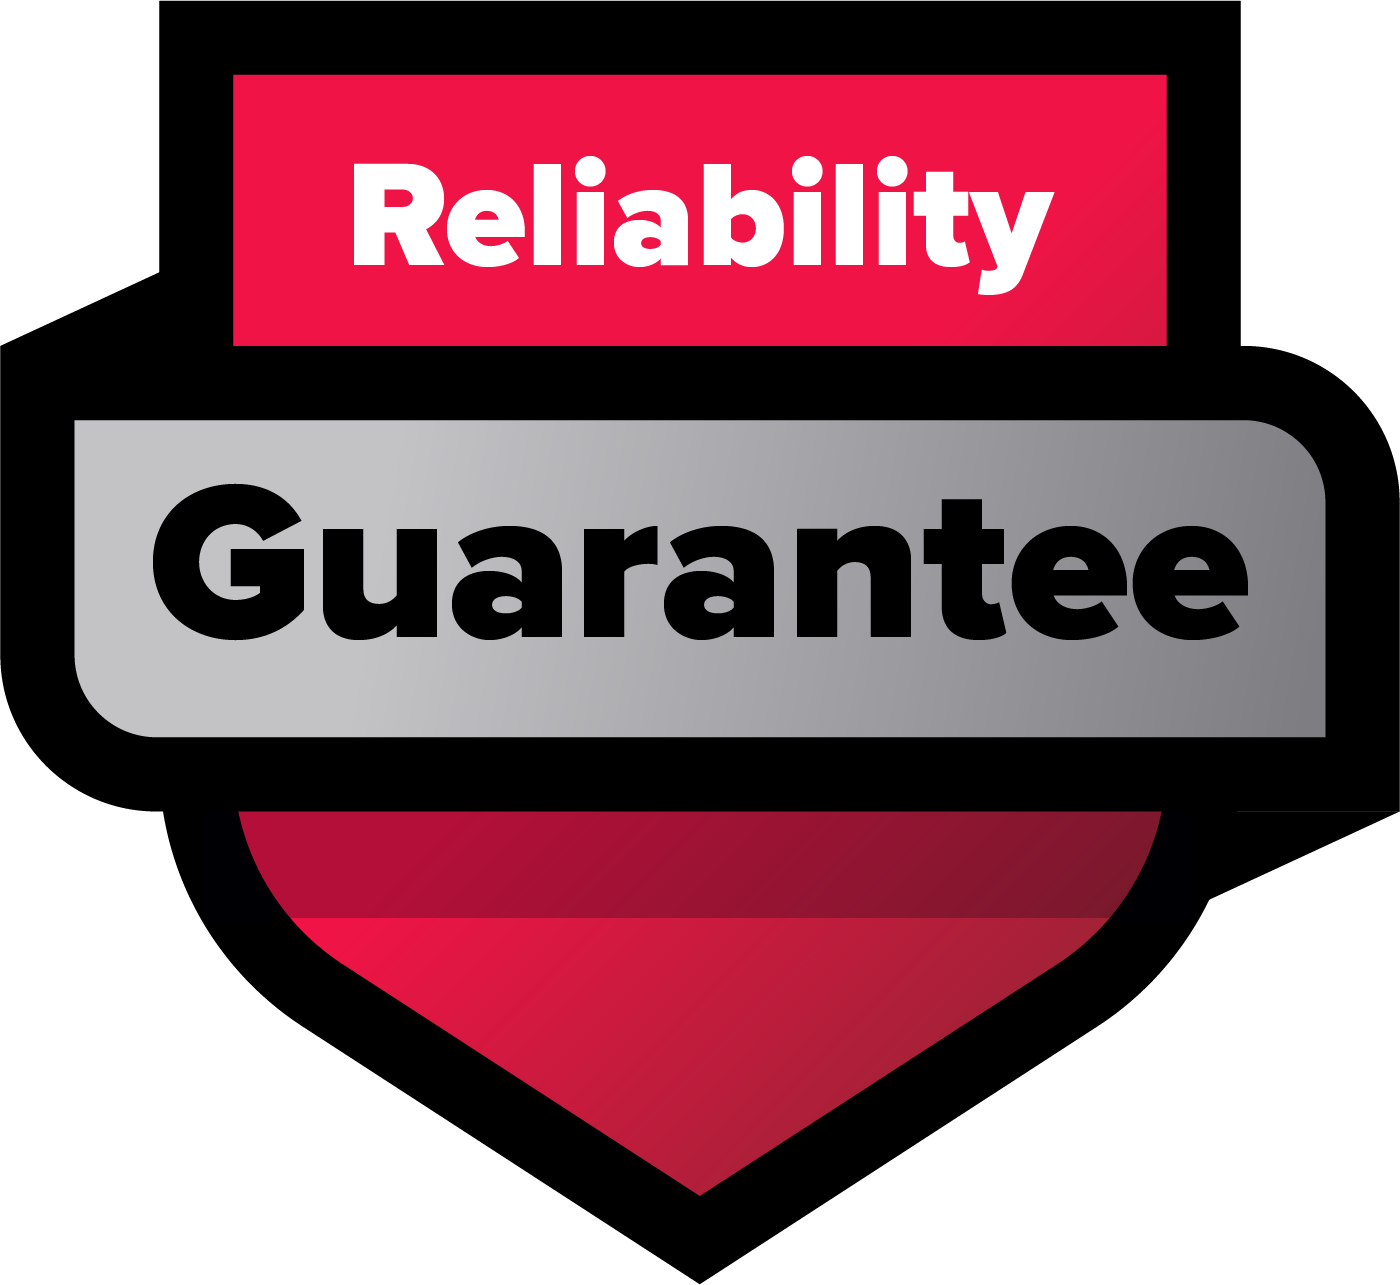 No surprises – rely on one consistent price with the 2-Year TV Price Guarantee